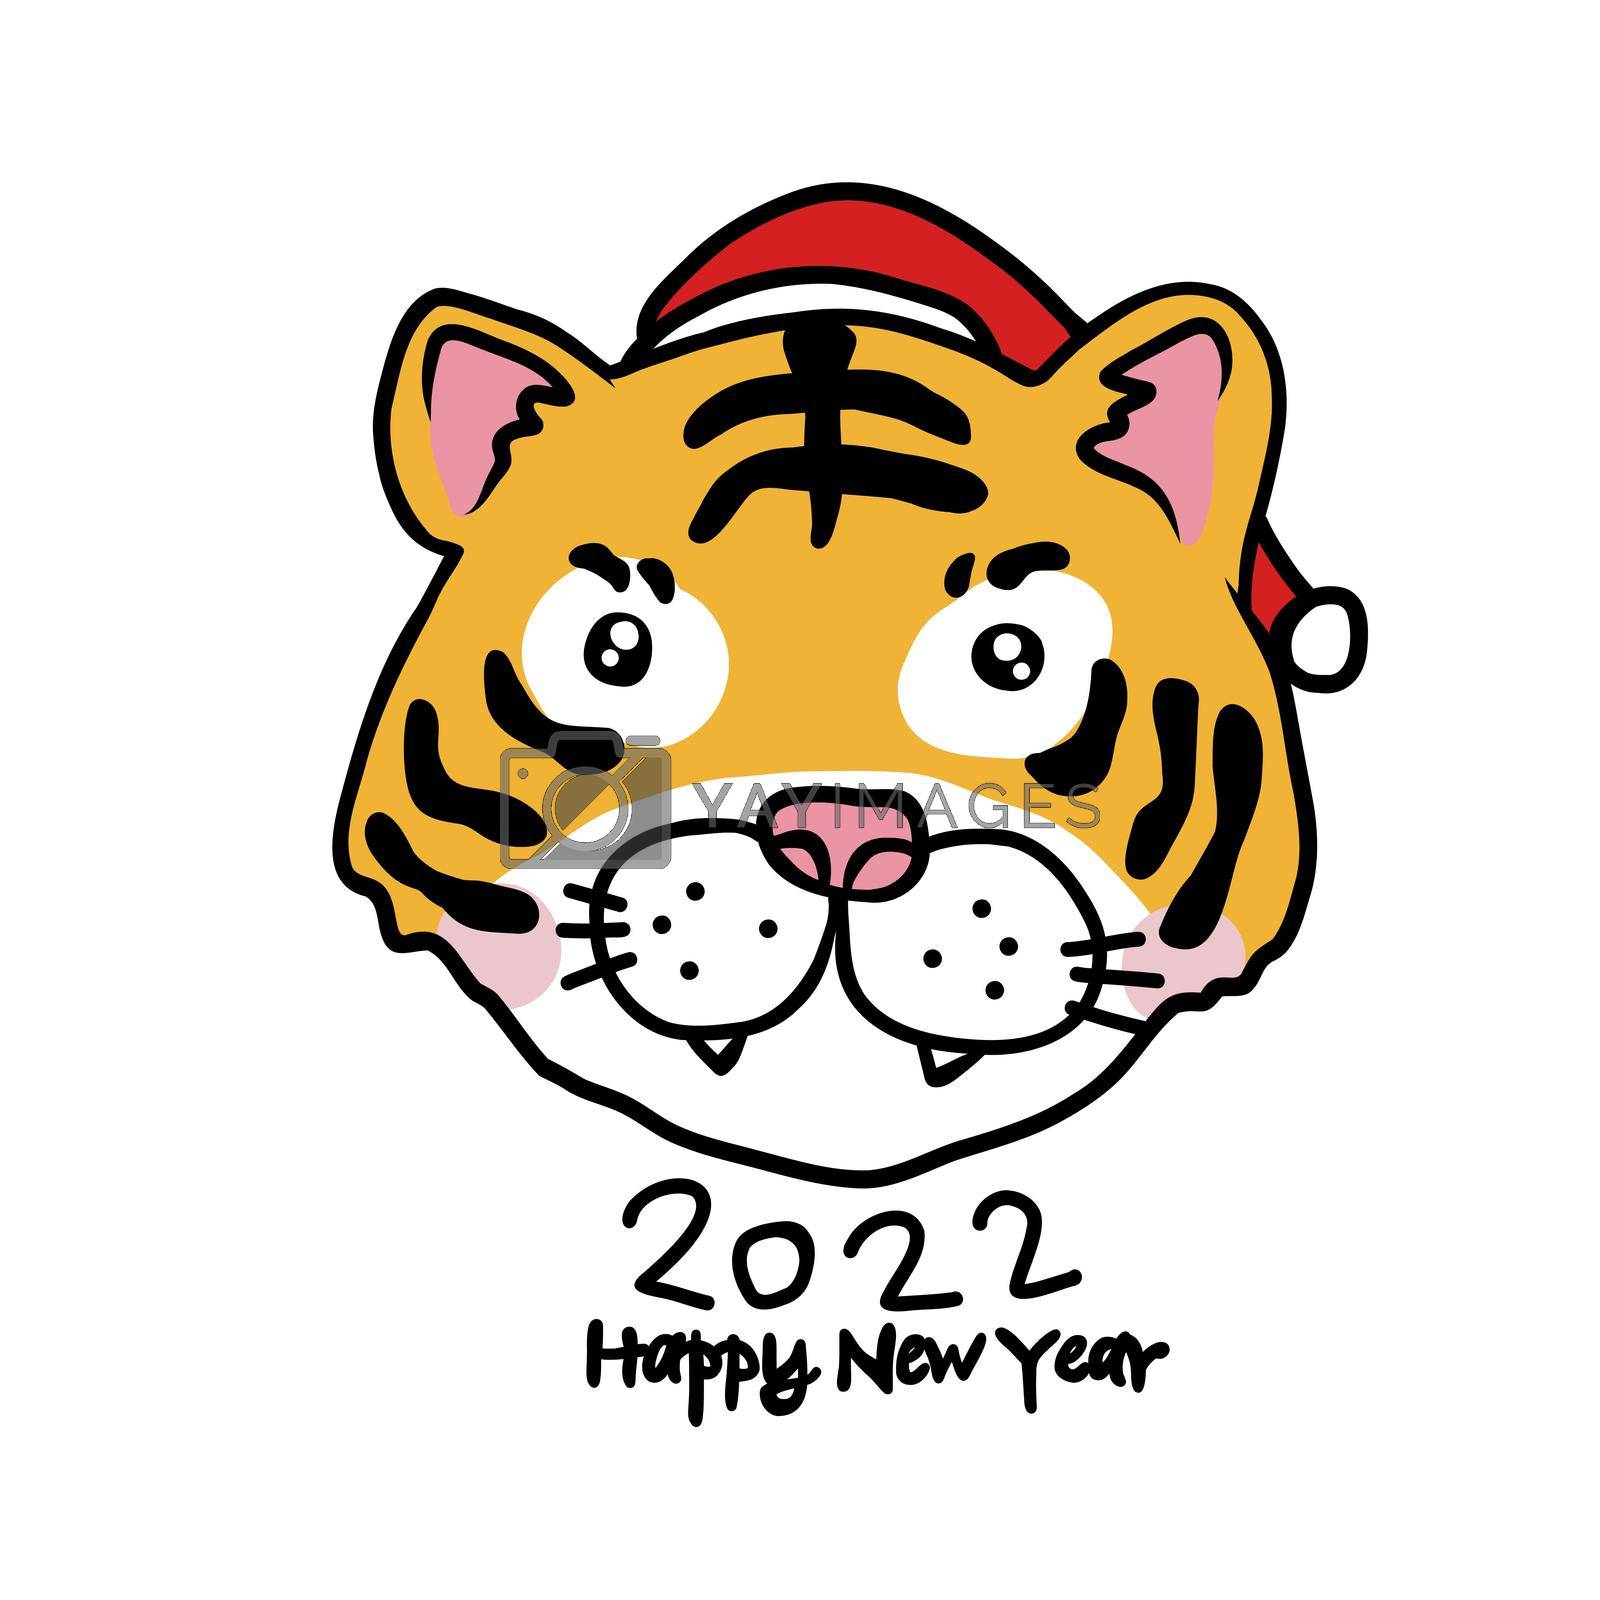 Royalty free image of 2022 Chinese New Year , Year of Tiger cartoon vector illustration by Yoopho